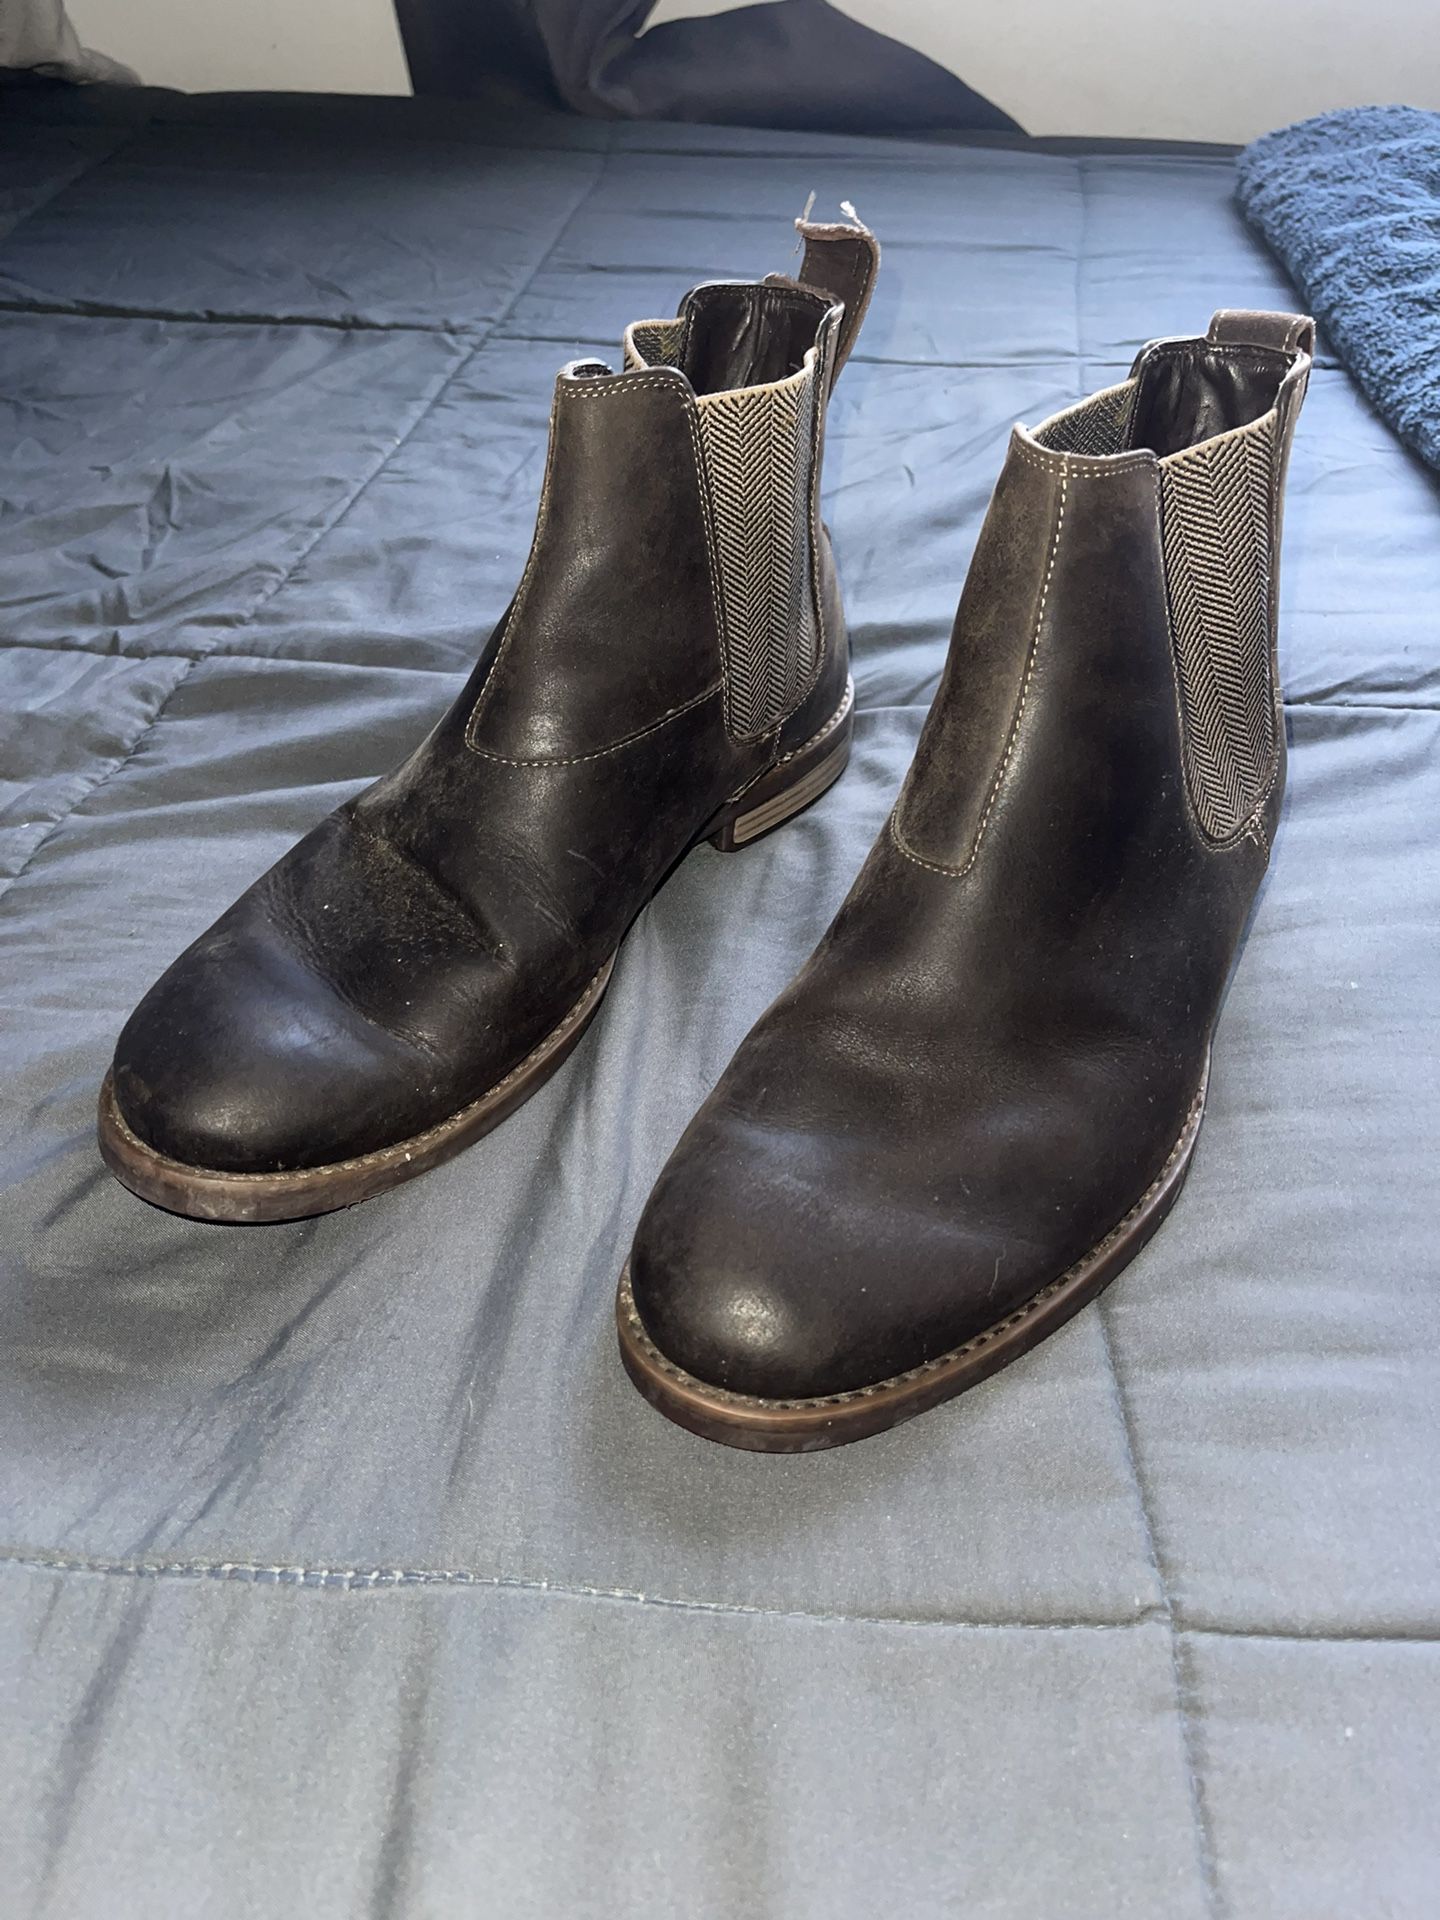 Nice Men’s Leather boots Size 10